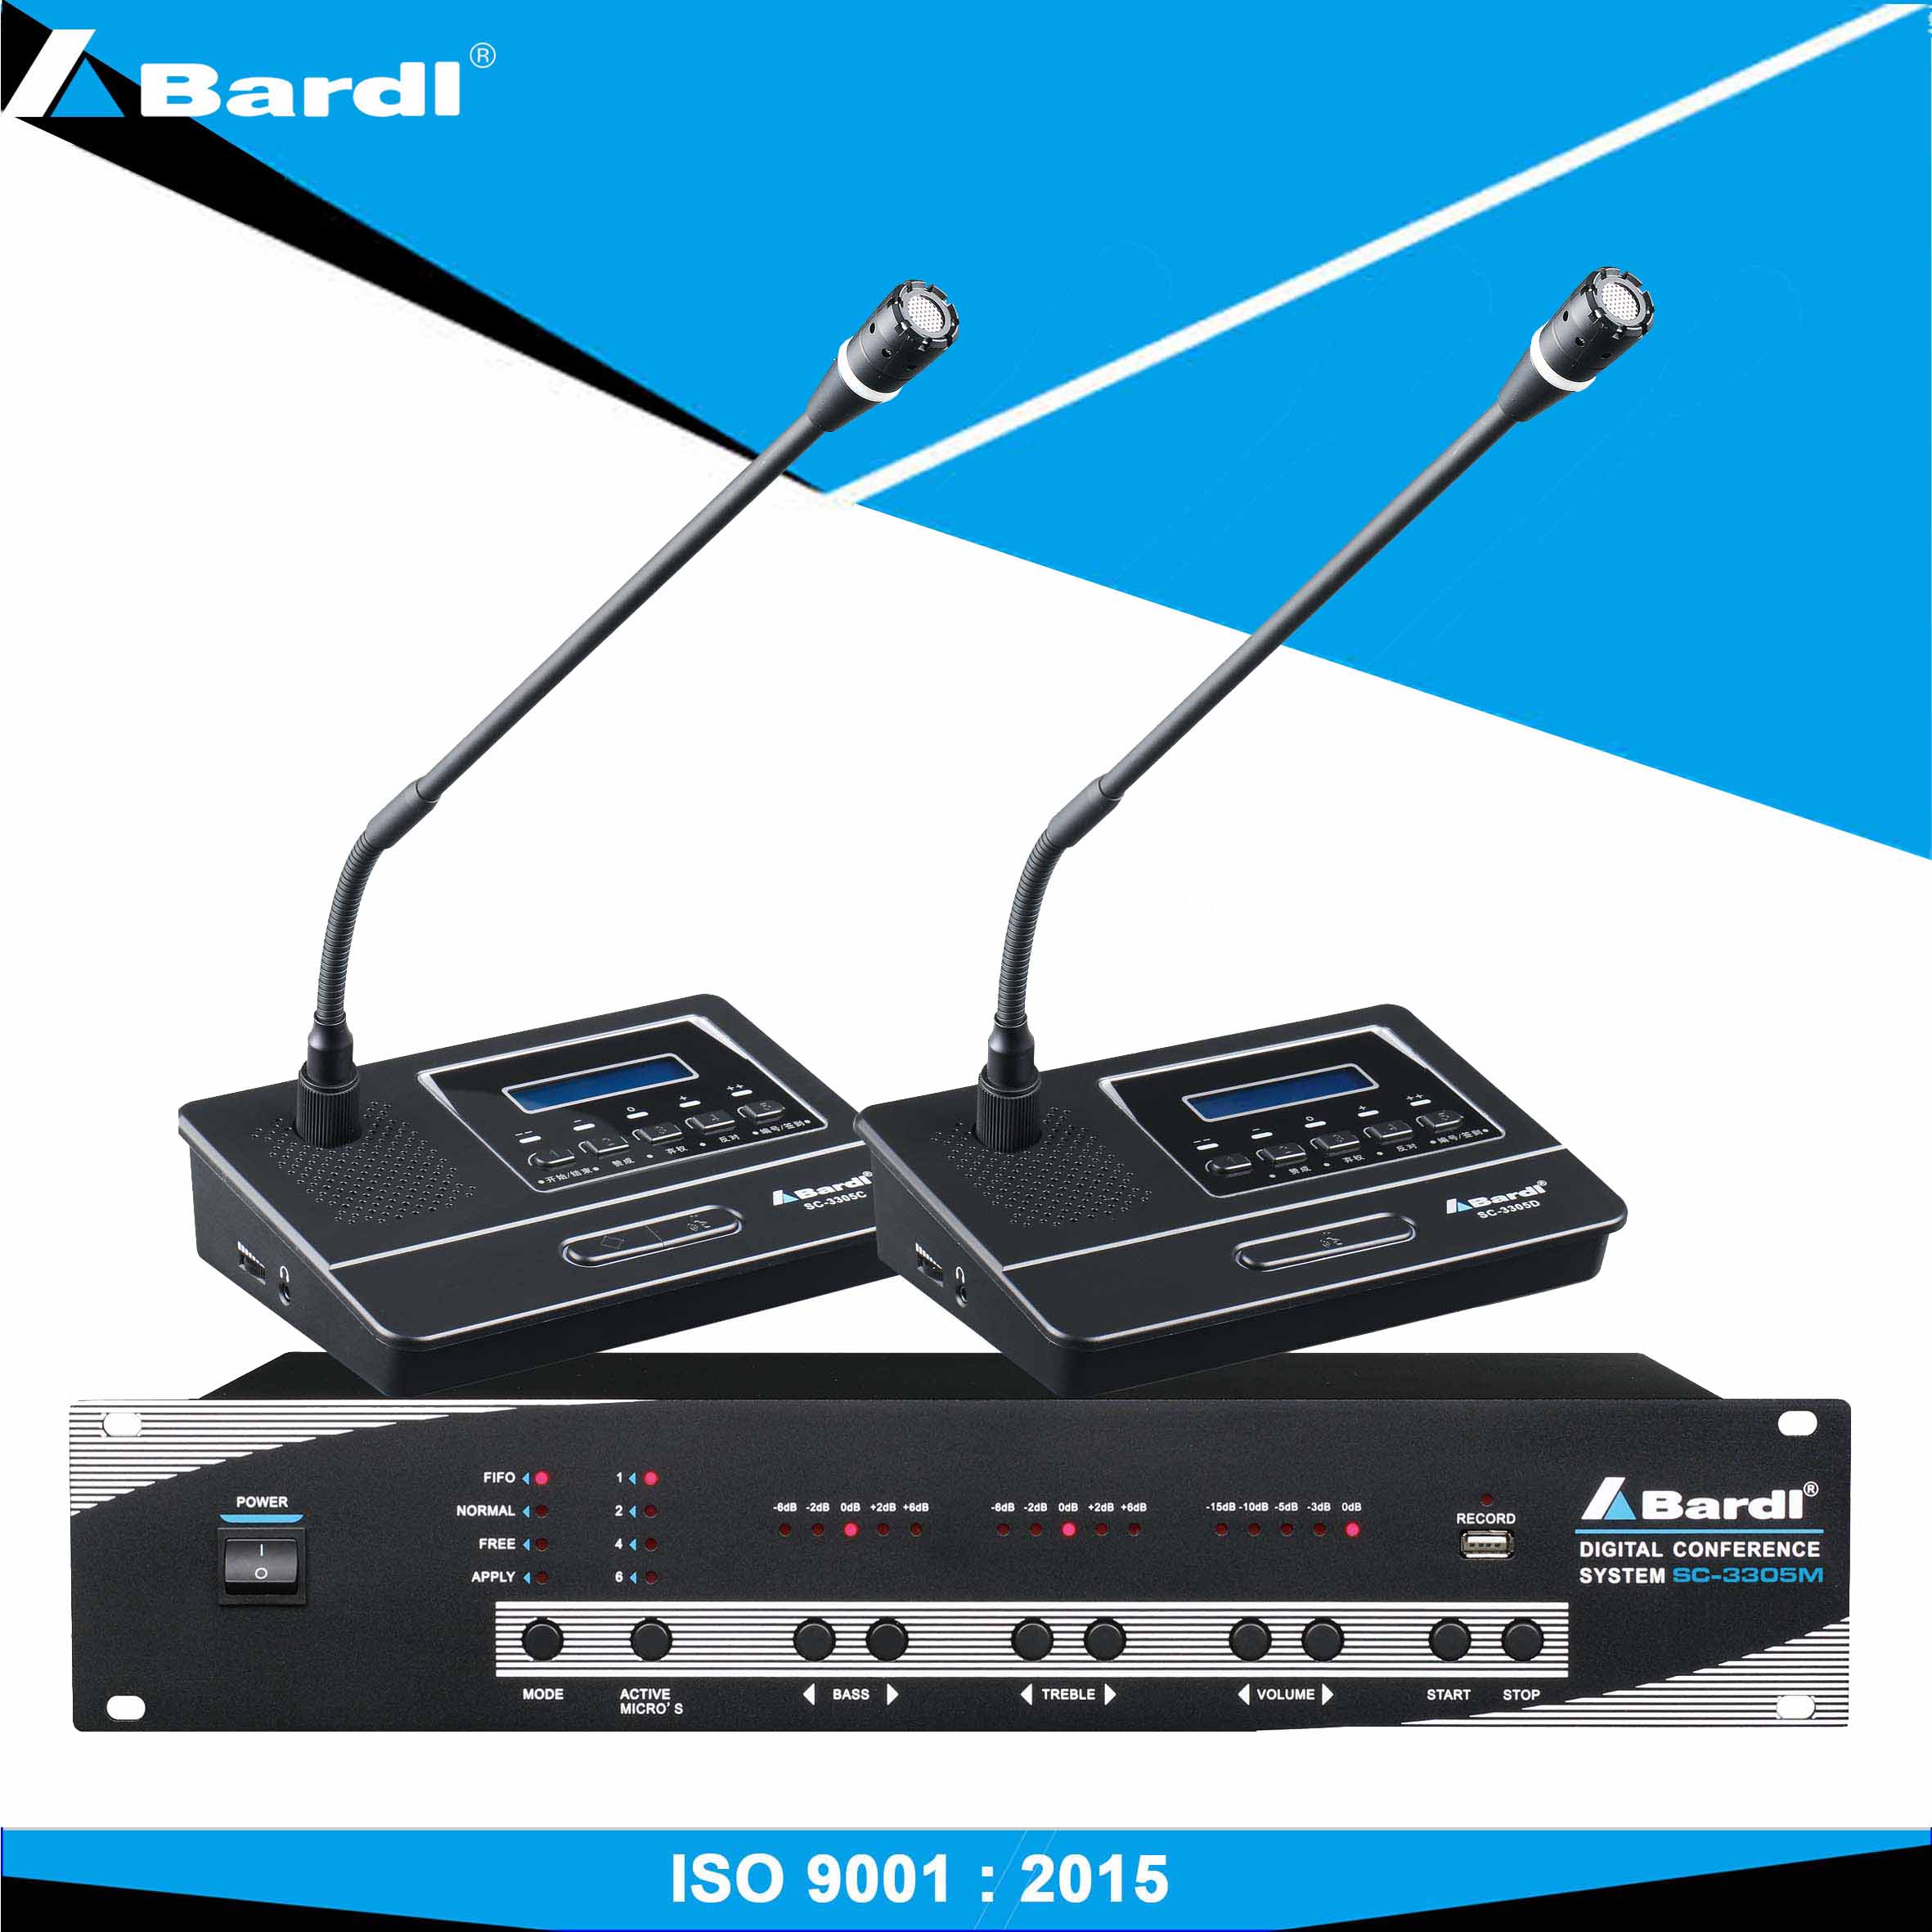 Bardl Conference system SC-3305 